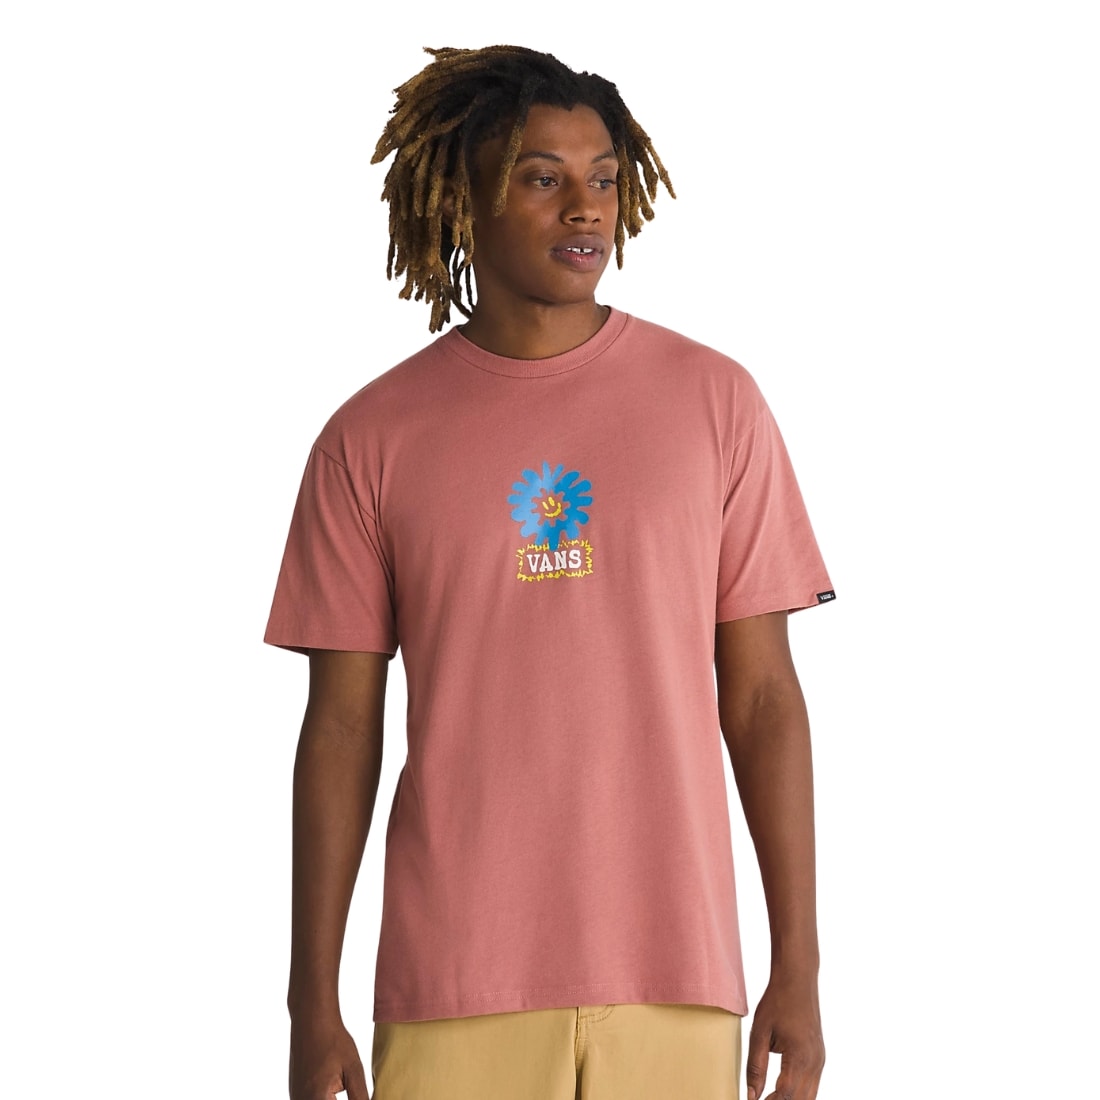 Vans Dual Bloom T-Shirt - Withered Rose - Mens Graphic T-Shirt by Vans